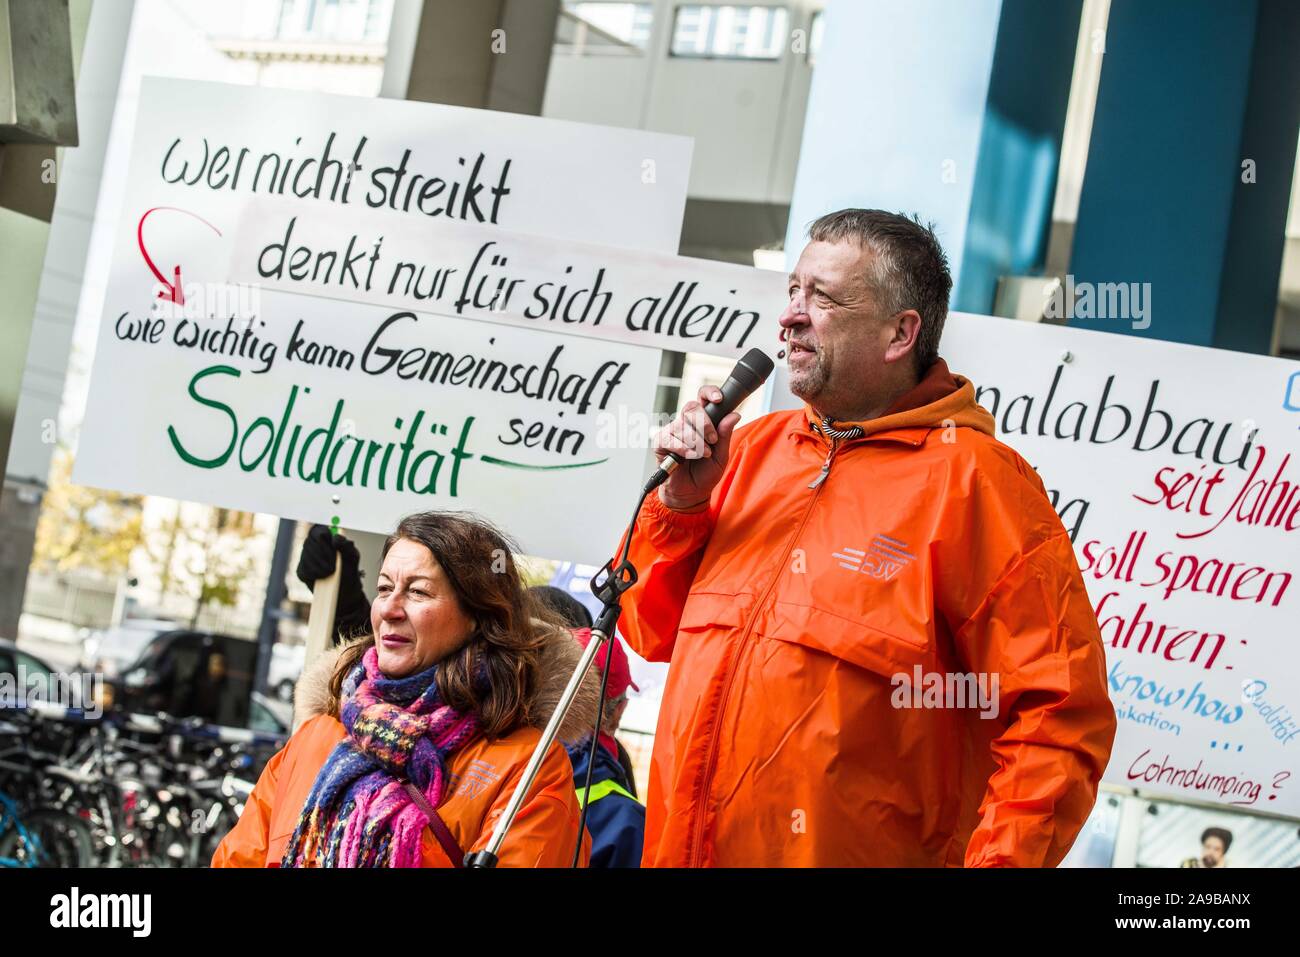 Munich, Bavaria, Germany. 14th Nov, 2019. Michael Busch of the Bavarian Journalist Union (BJV). Demanding a raise of 7, 8% over 33 months, along with increases of payments, licenses, and other payouts, the Bavarian Journalist Union (Bayerischer Journalisten Verband) called for another 48-hour strike against the Bayerischer Rundfunk media house in Munich. The strike encompasses journalists, redaction/editorial staff, and those in related roles with at least 350 in attendance at the Munich location. Credit: ZUMA Press, Inc./Alamy Live News Stock Photo